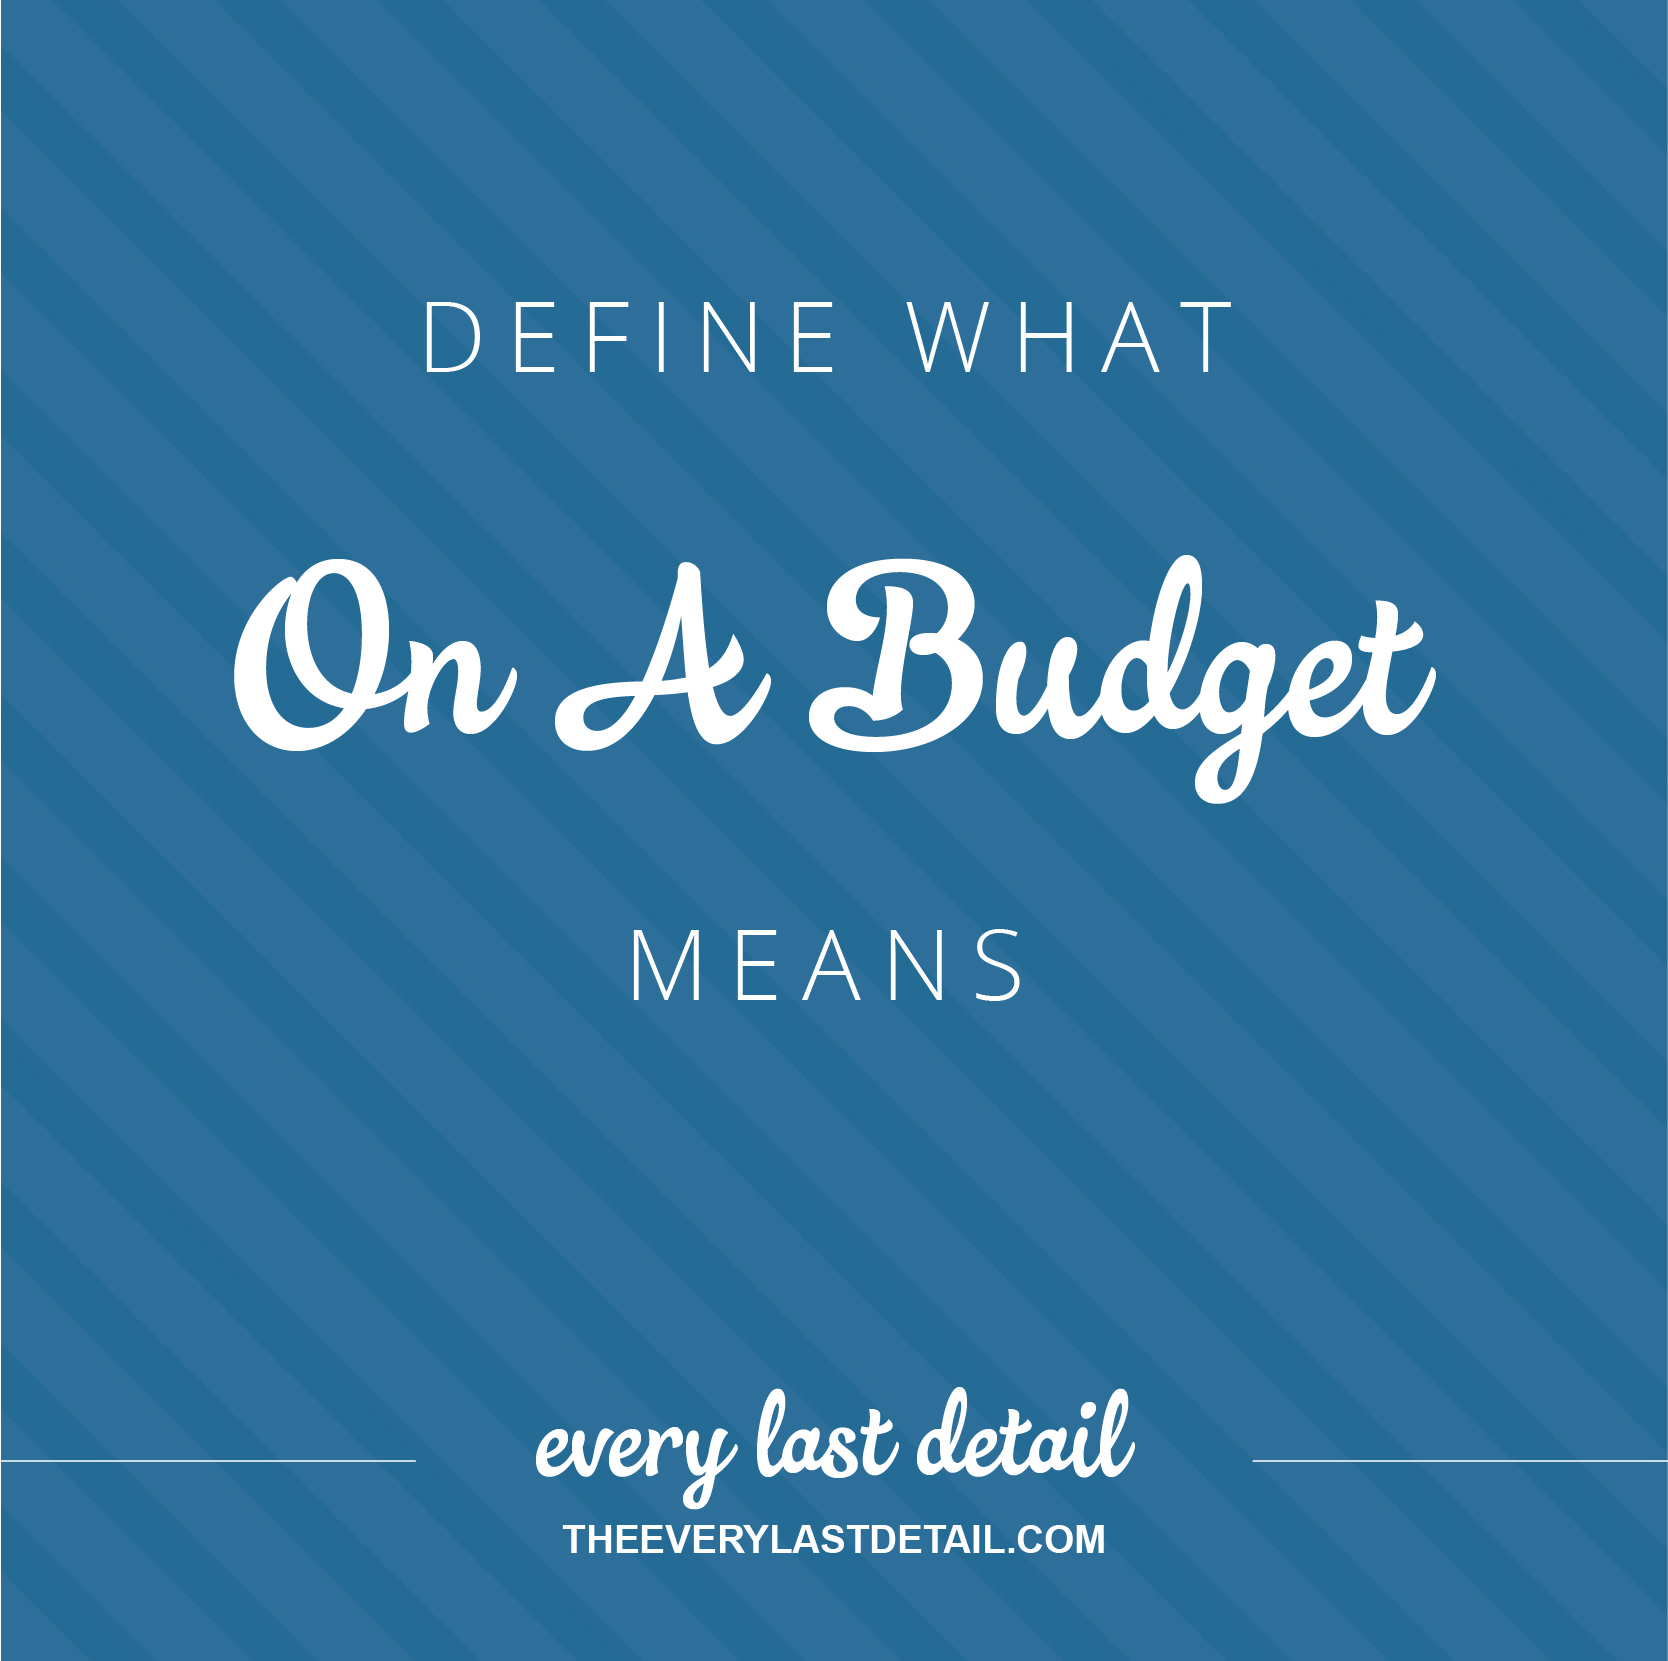 Define What On A Budget Means via TheELD.com